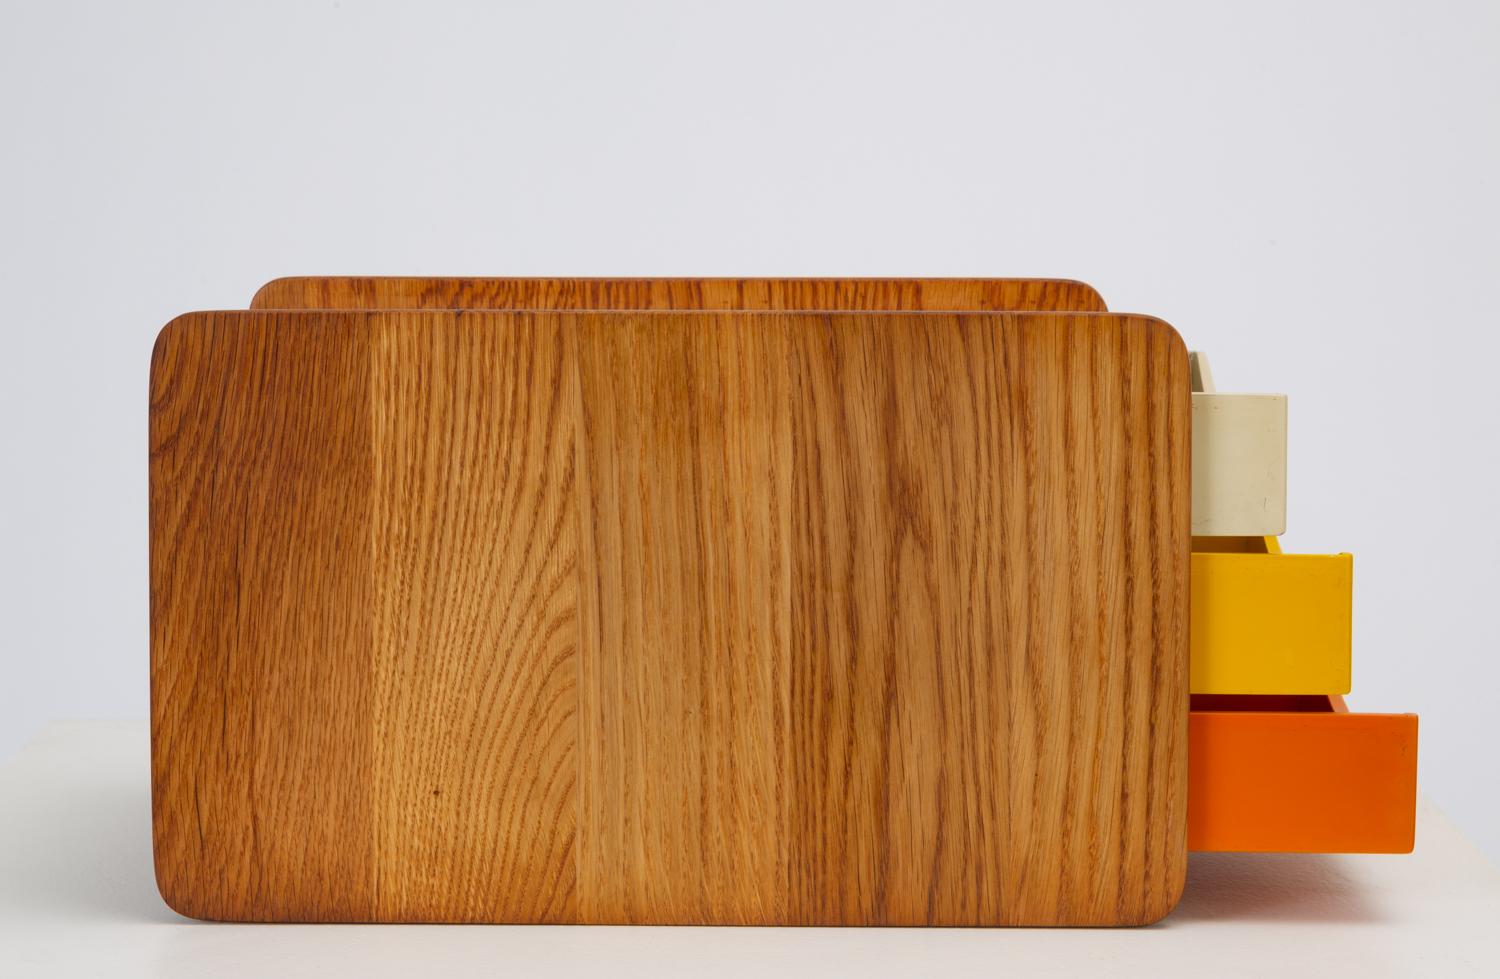 20th Century Oak Desk Organizer with Painted Drawers by Børge Mogensen for Karl Andersson